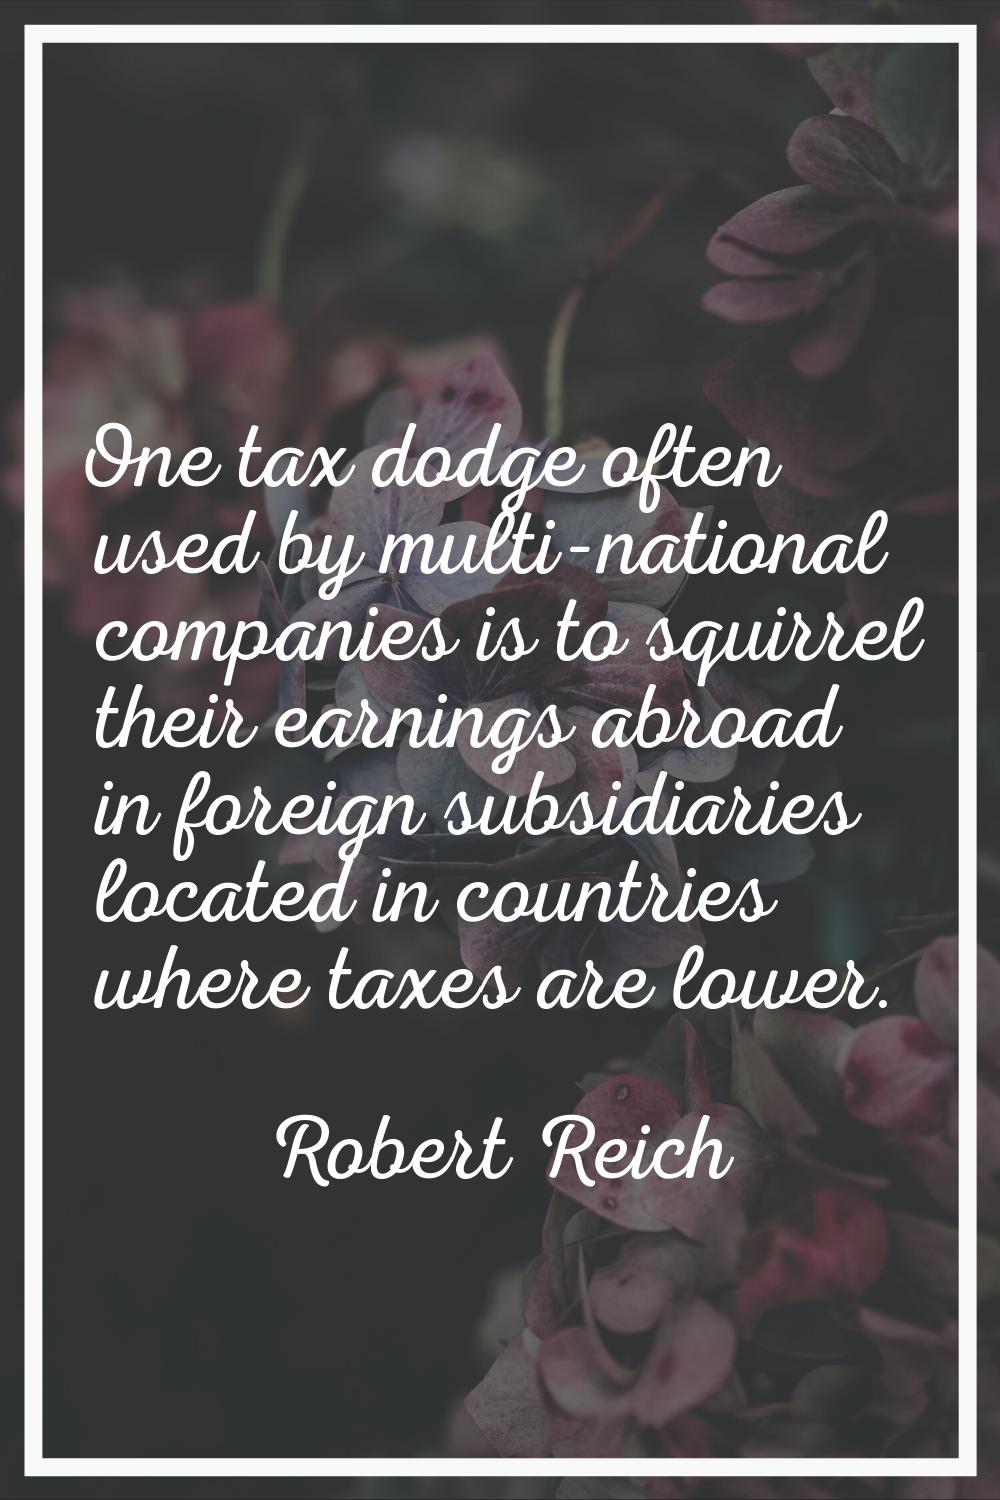 One tax dodge often used by multi-national companies is to squirrel their earnings abroad in foreig